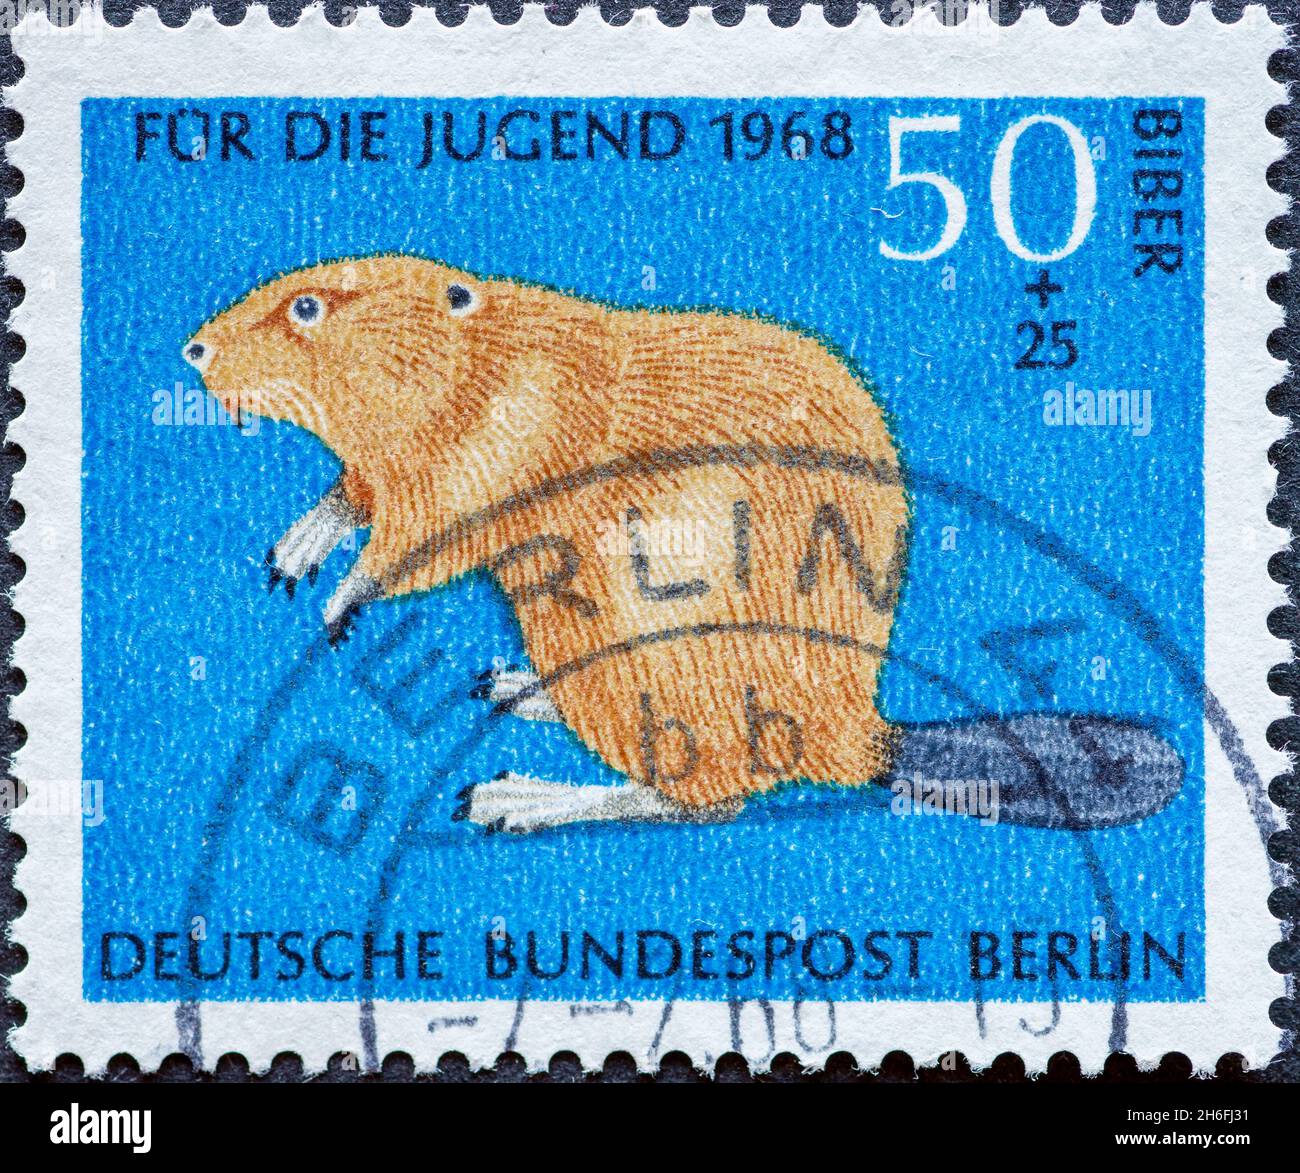 GERMANY, Berlin - CIRCA 1968: a postage stamp from Germany, Berlin showing  rare wild animals. beaver. charity postal stamp for the youth Stock Photo -  Alamy